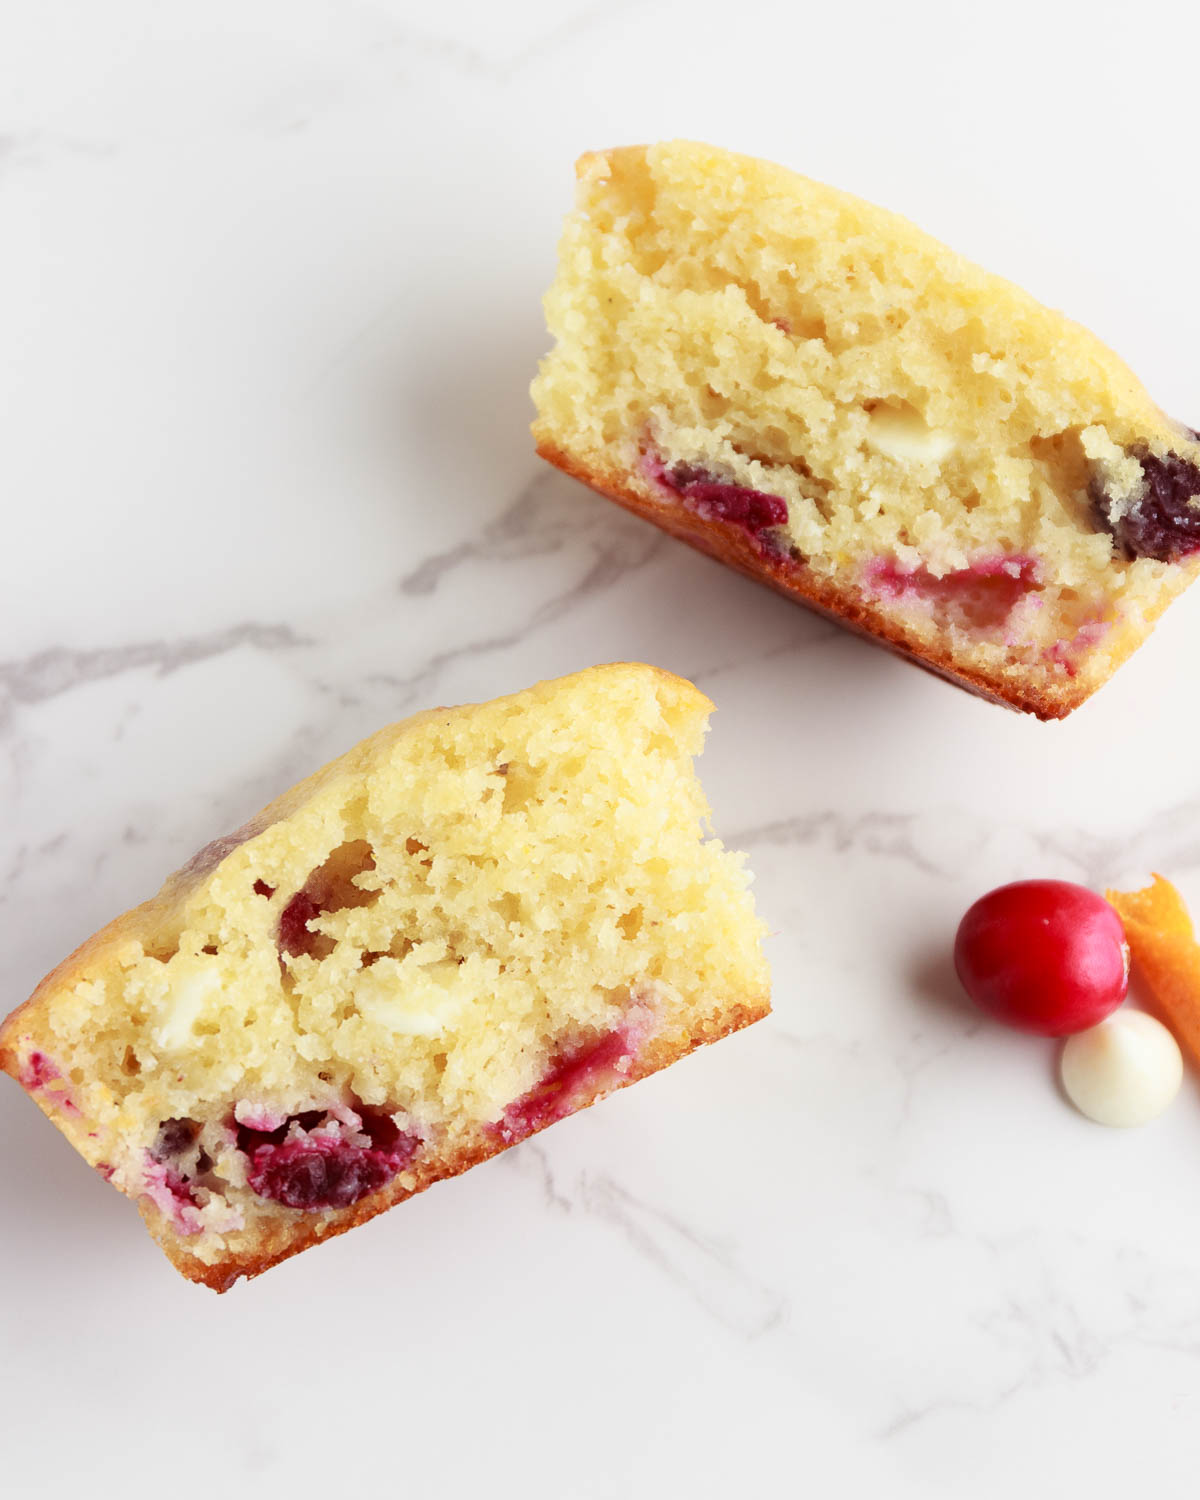 Keto Orange Cranberry Muffin with white chocolate chips and cut in half. .